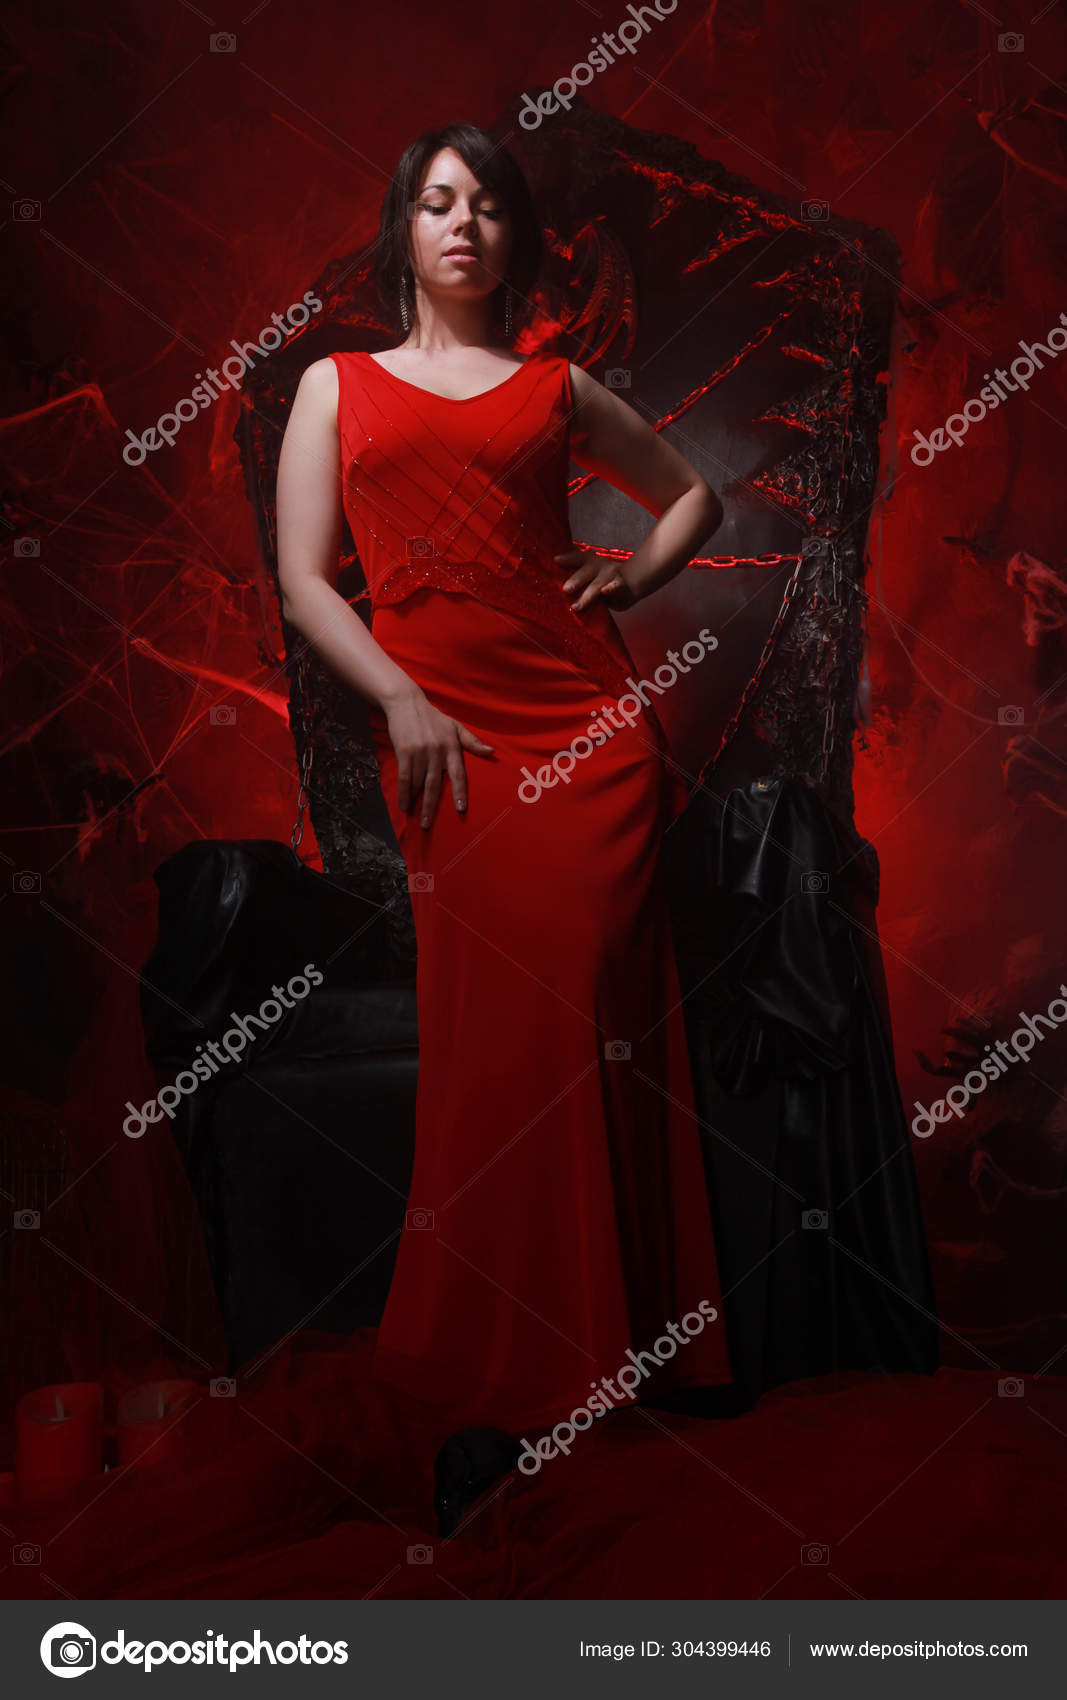 Beautiful Lonely Girl In Long Red Dress On The Halloween Throne Ready For Scary Party Stock Photo C Agnadevi 304399446